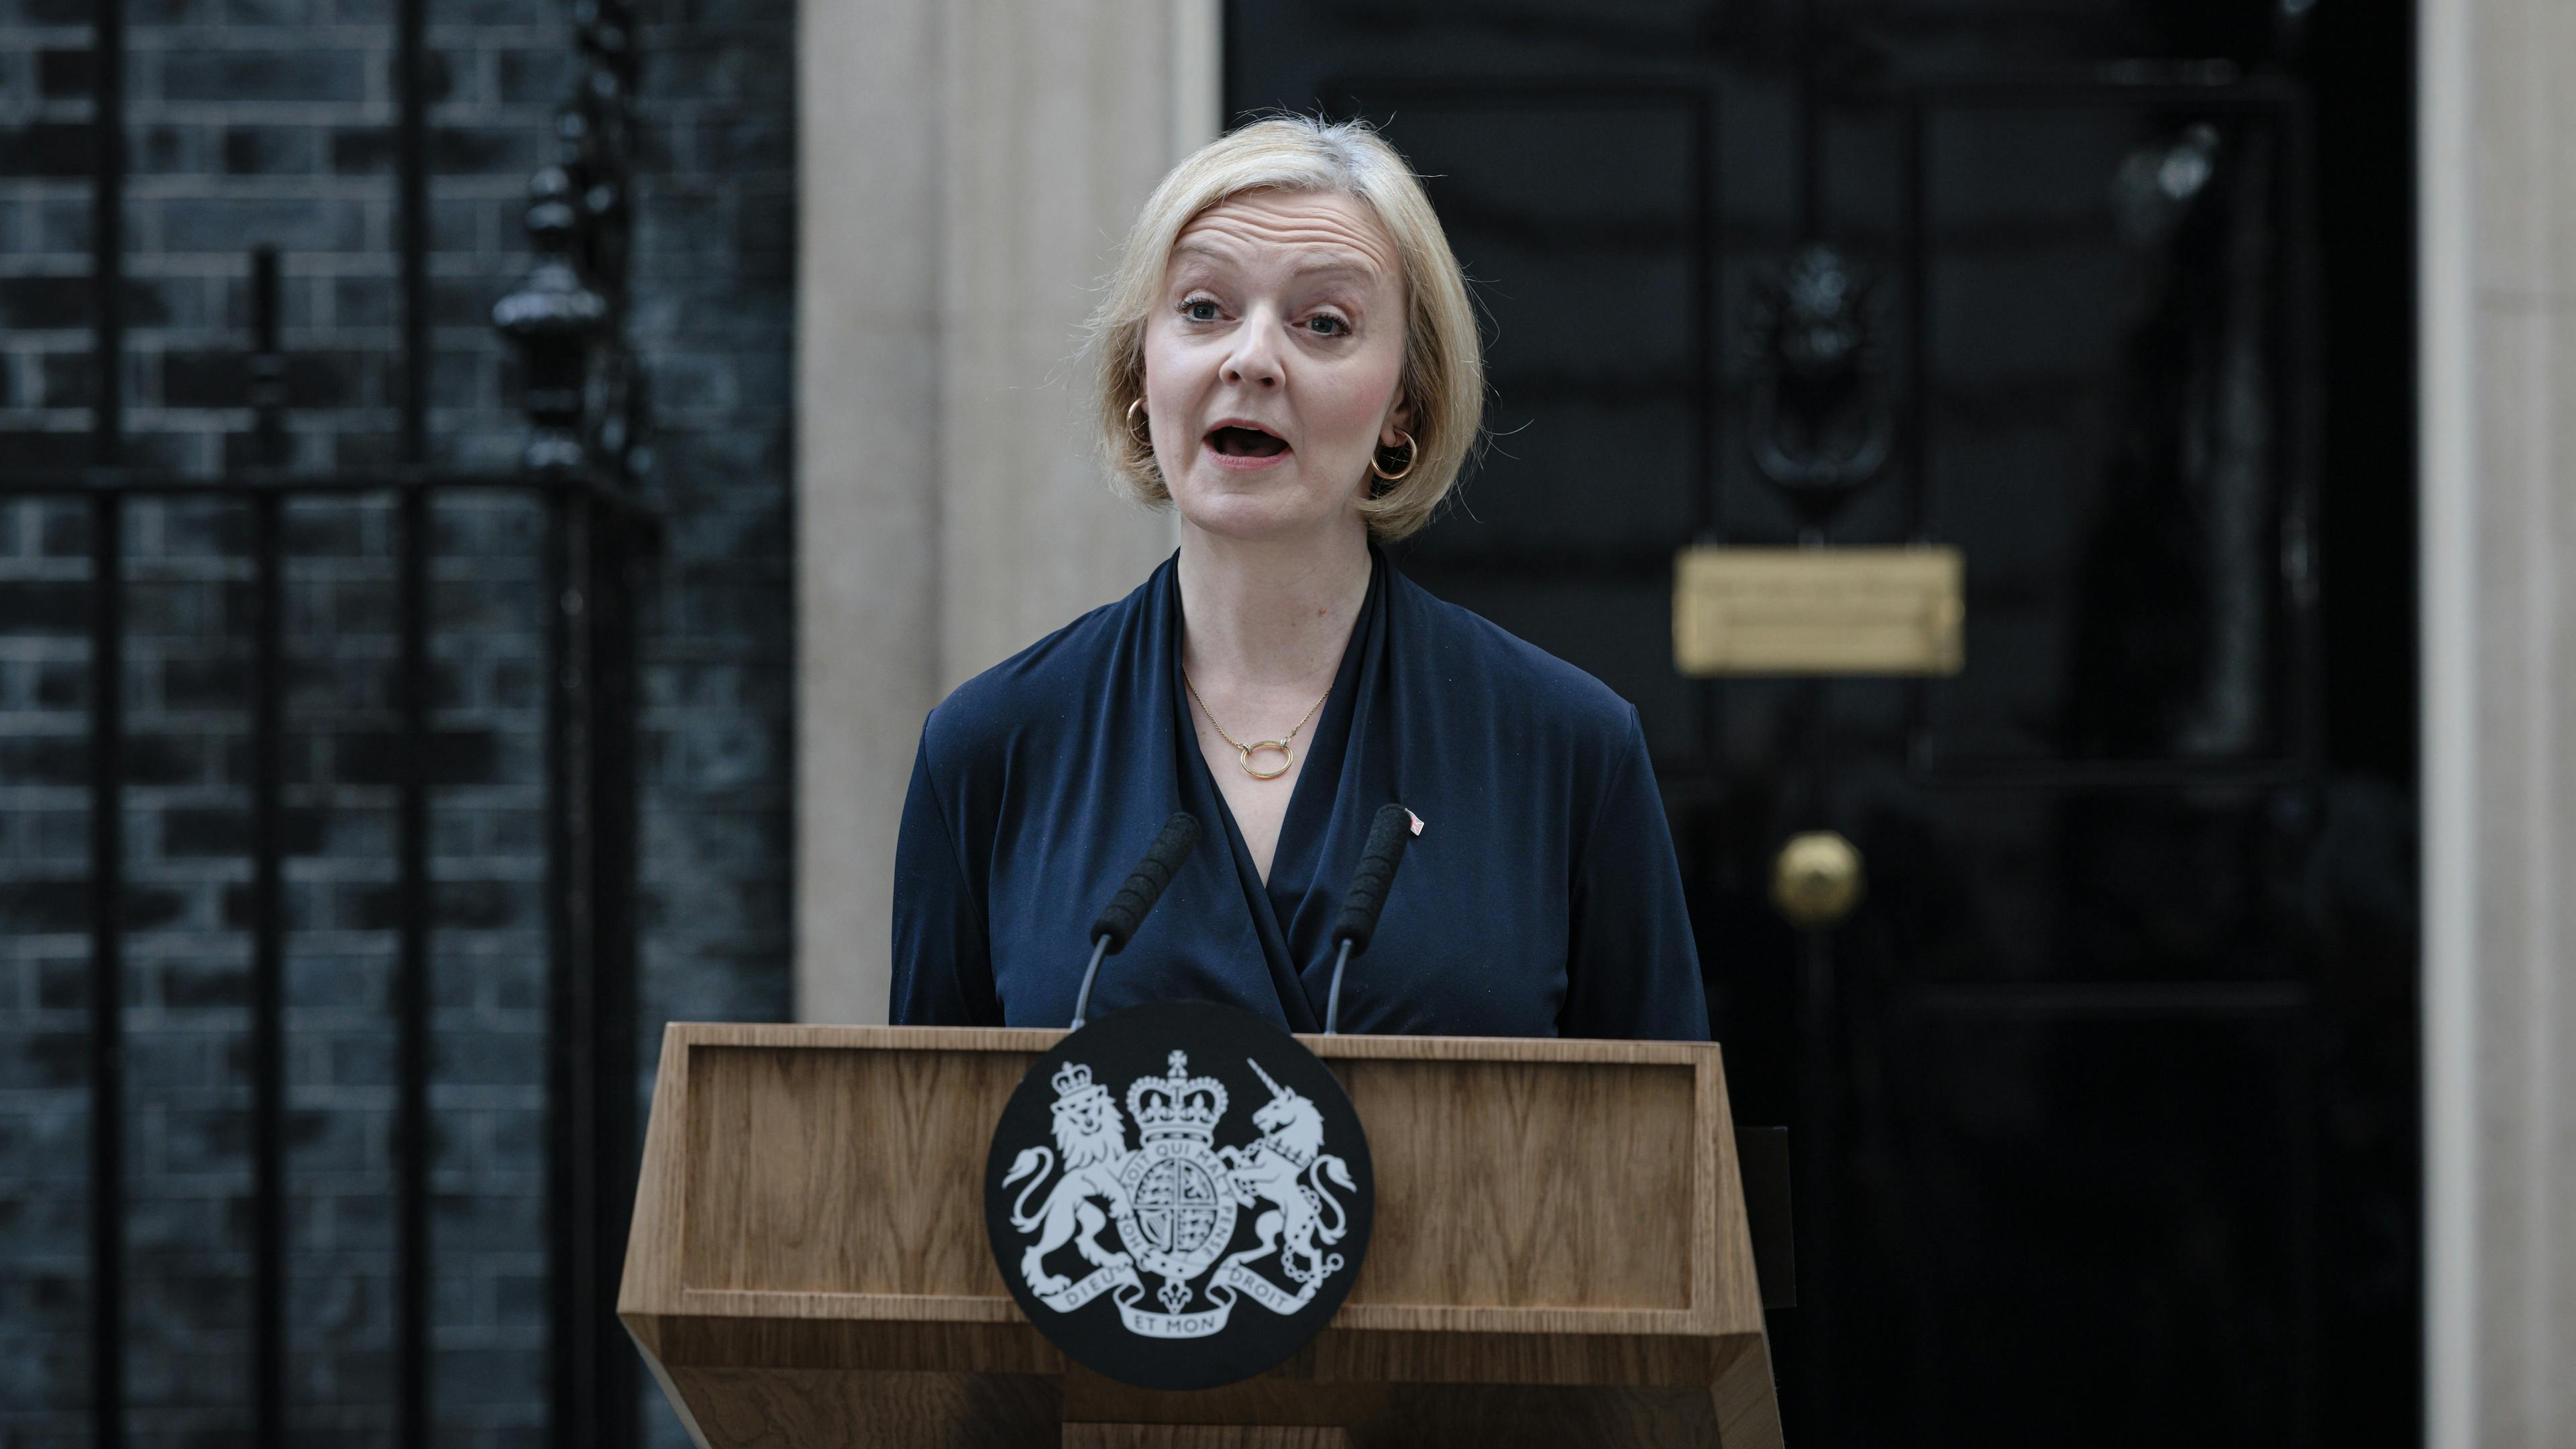 Liz truss, in dark clothing, addressing reporters in front of 10 downing street in London after resigning. 